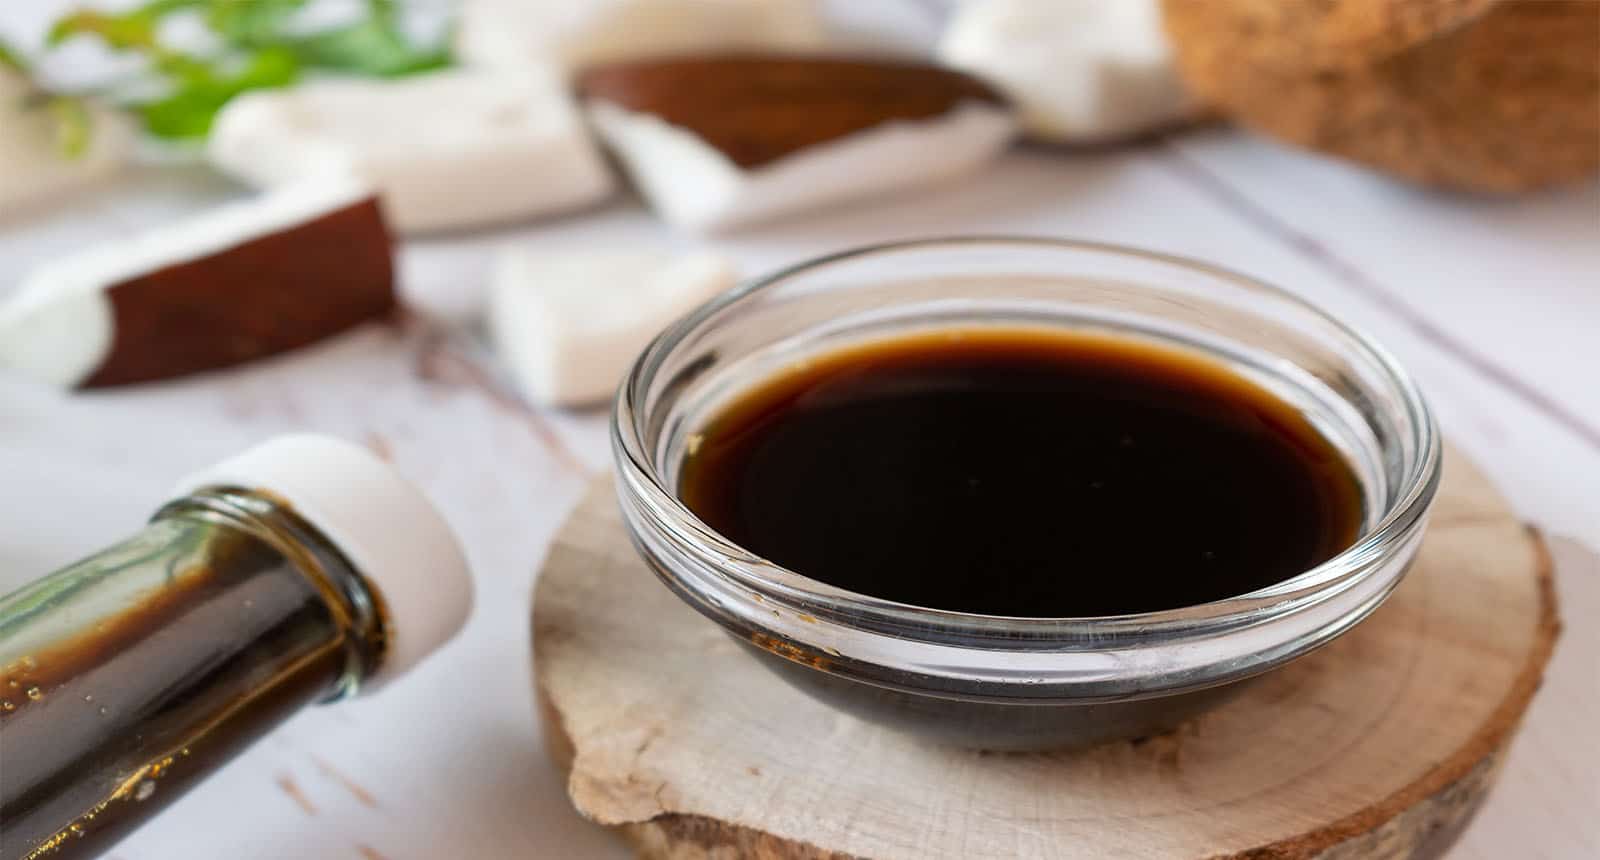 10 Oyster Sauce Substitutes (+ Homemade Oyster Sauce)